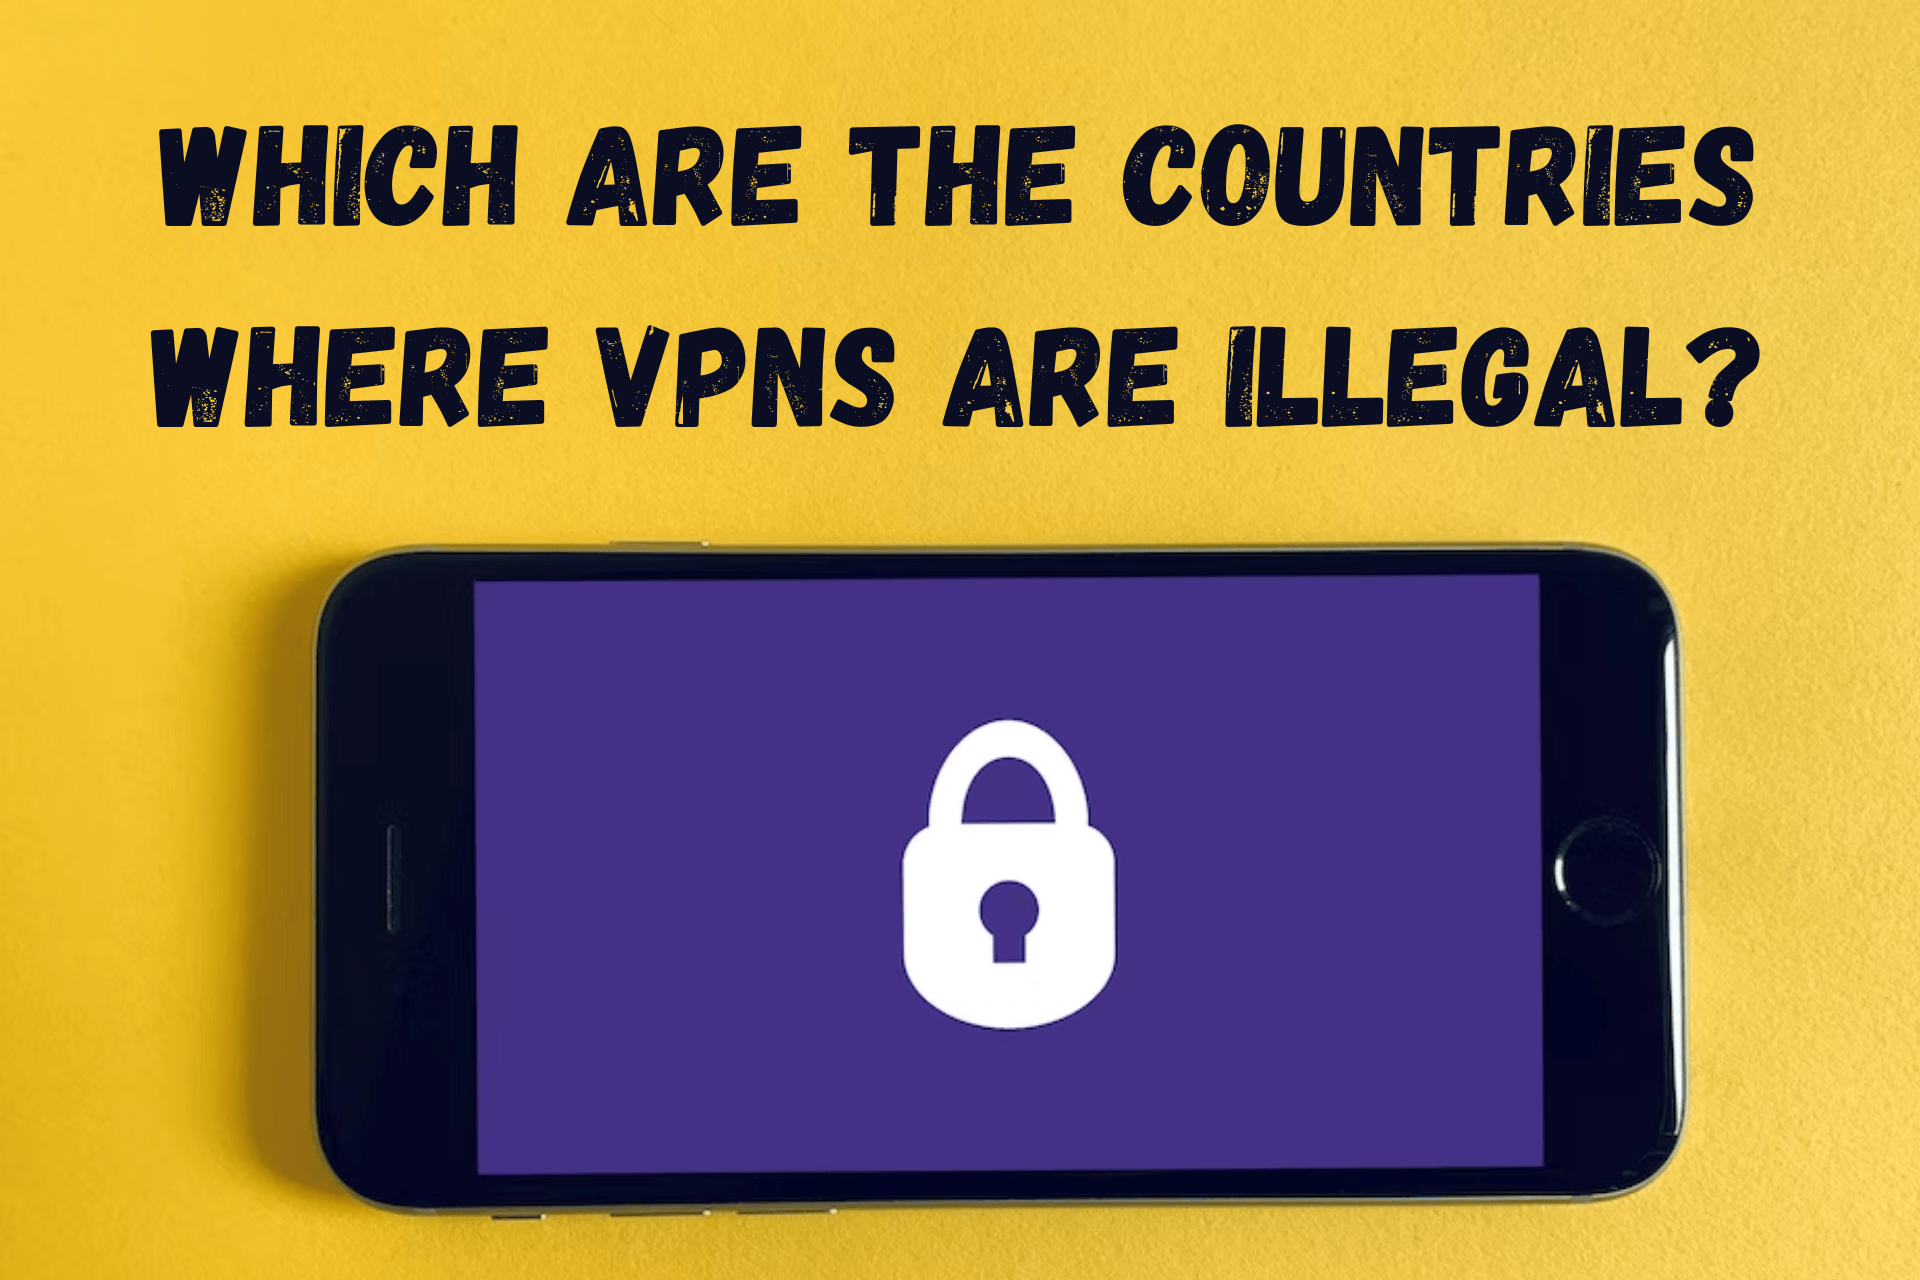 Countries where VPNS are illegal